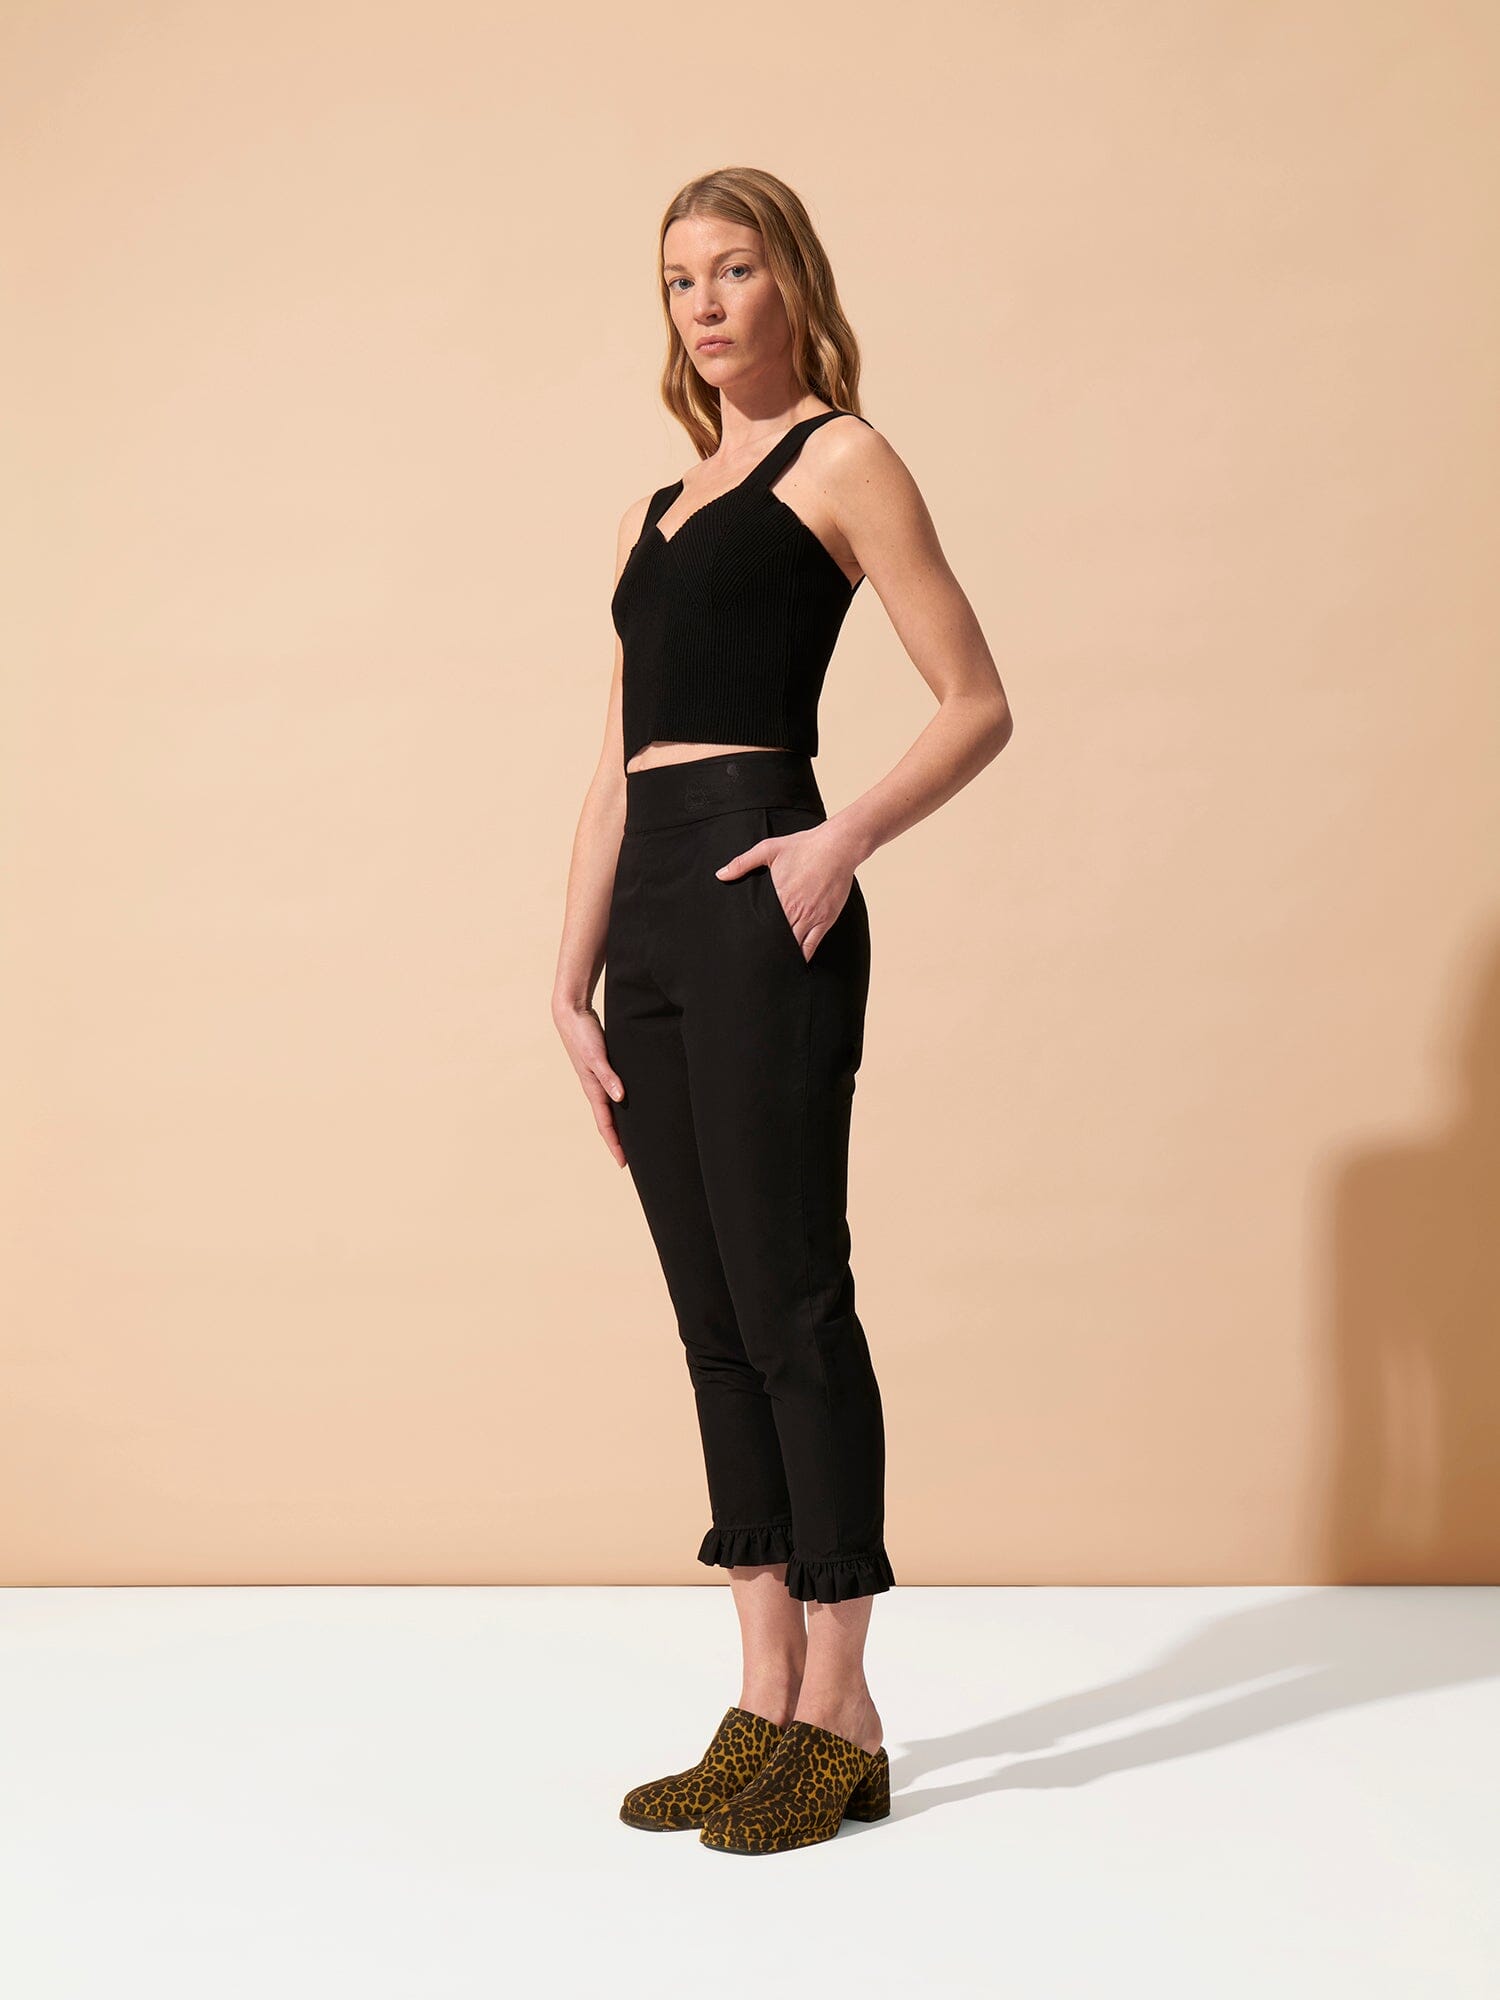 JACKIE - Ribbed knit top with wide straps and low-cut back Oeko-Tex Black Top Fête Impériale